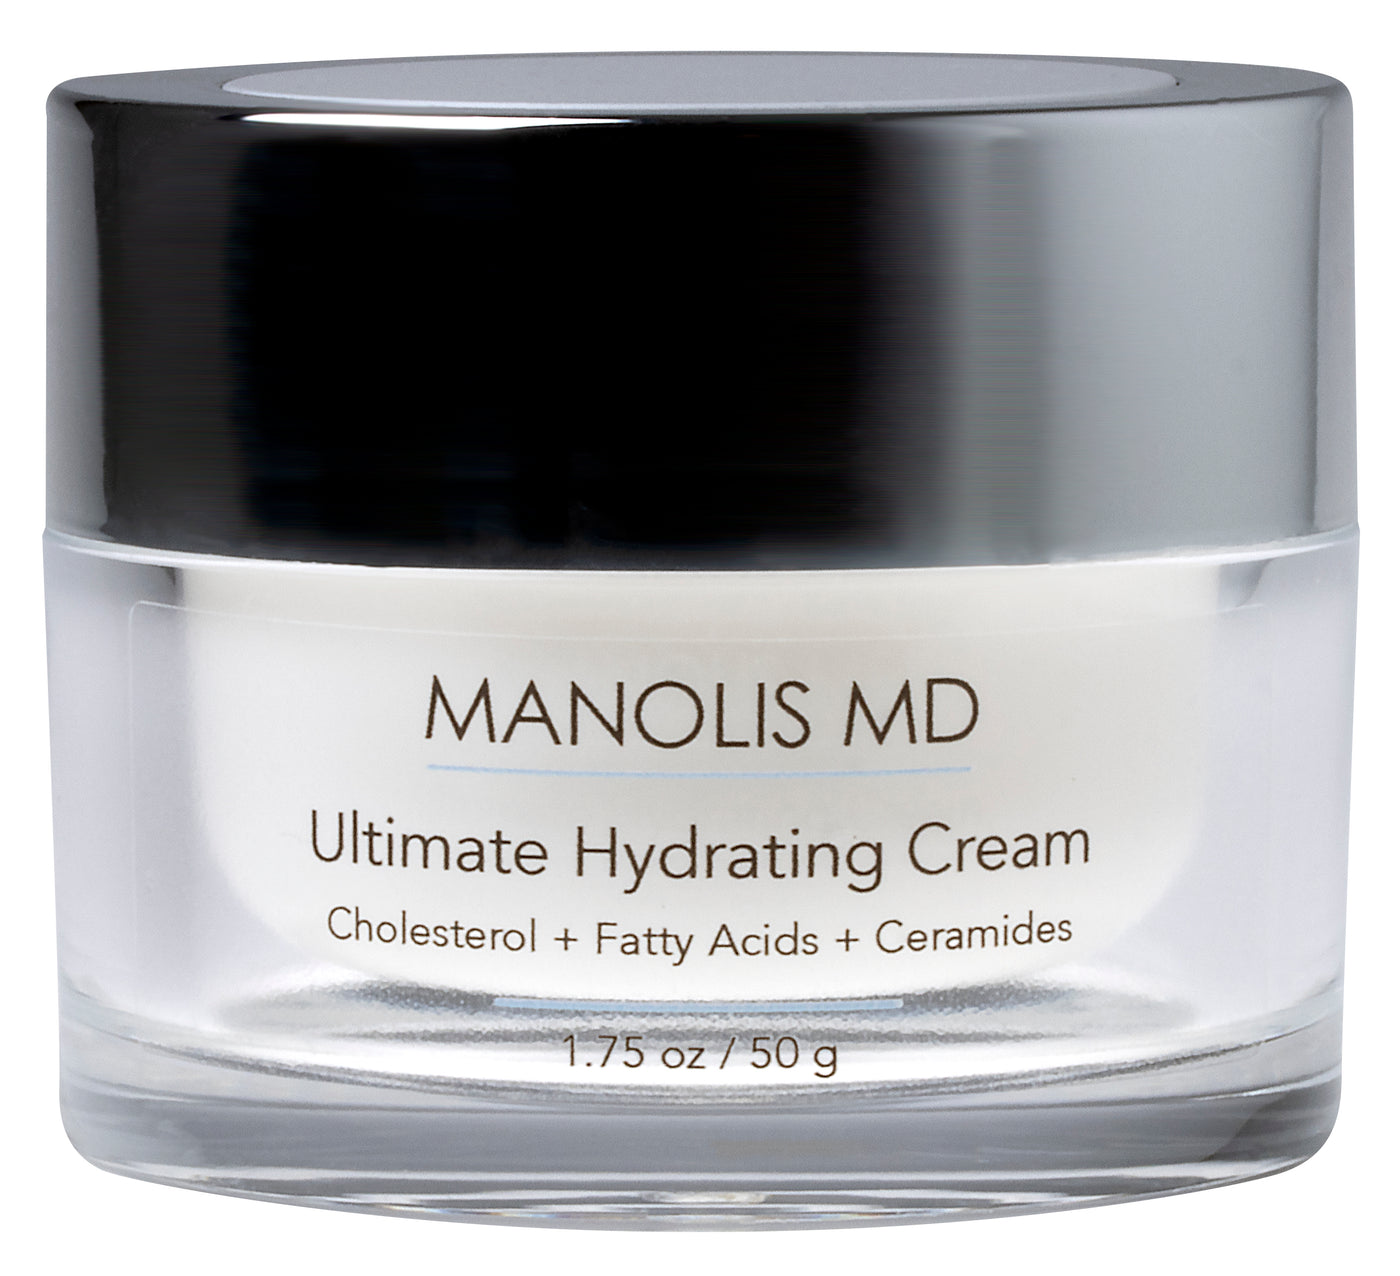 This is a great moisturizer for people with mature skin as well. Contains ingredients that have been clinically proven to reduce the appearance of dry, cracked, and flakey skin.